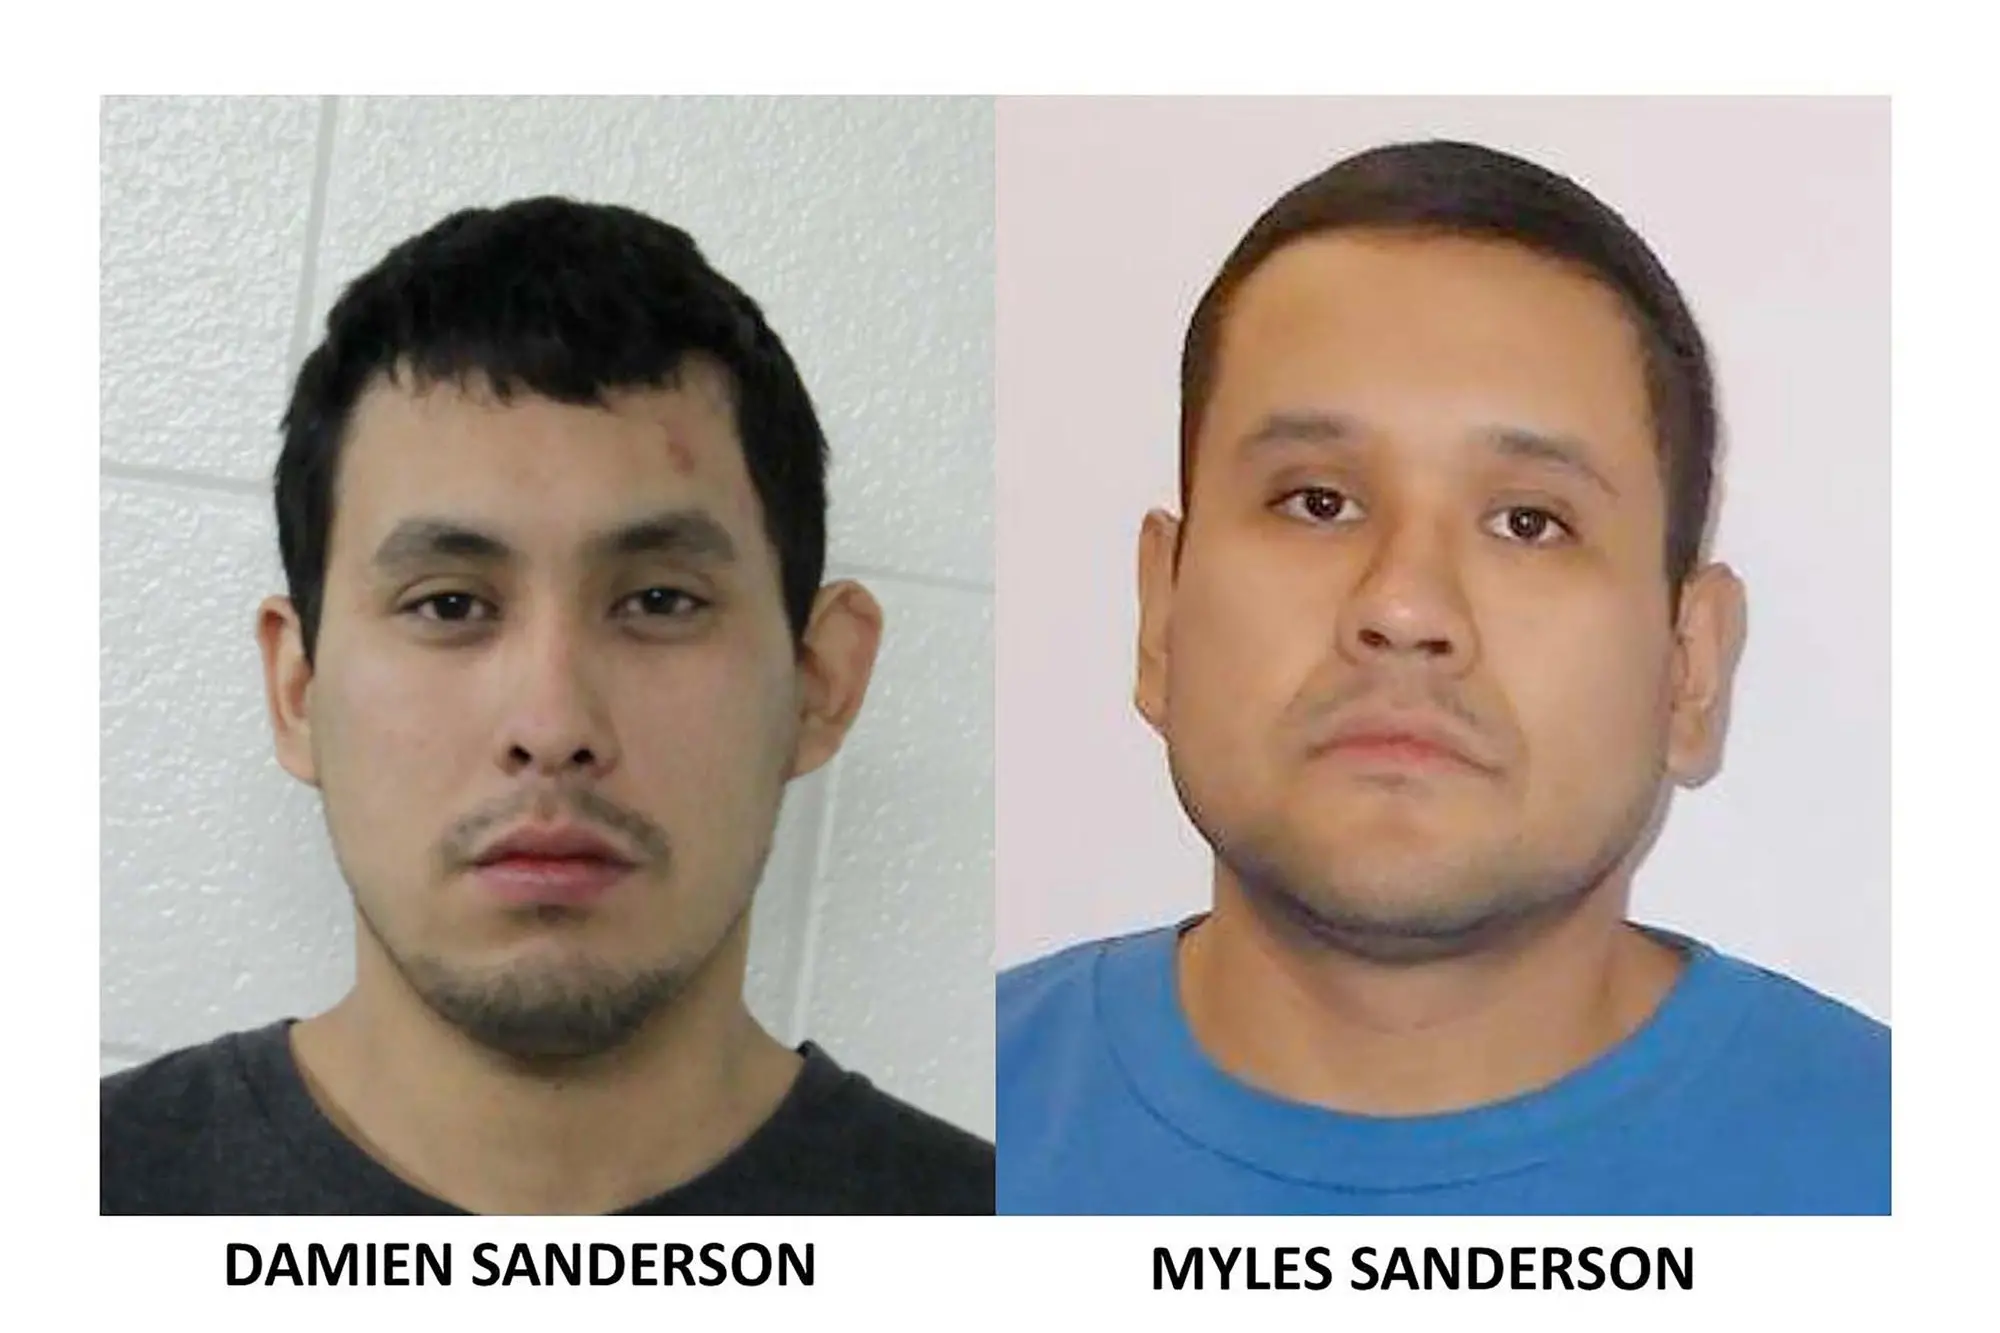 epa10160300 A handout combination photo made available by the Royal Canadian Mounted Police showing suspects Damien Sanderson (L) and Myles Sanderson (R) who are actively being sought by police in connection with stabbings in the James Smith Cree Nation, Saskatchewan, Canada, 04 September 2022. EPA/ROYAL CANADIAN MOUNTED POLICE / HANDOUT EDITORIAL USE ONLY, NO SALES HANDOUT EDITORIAL USE ONLY/NO SALES